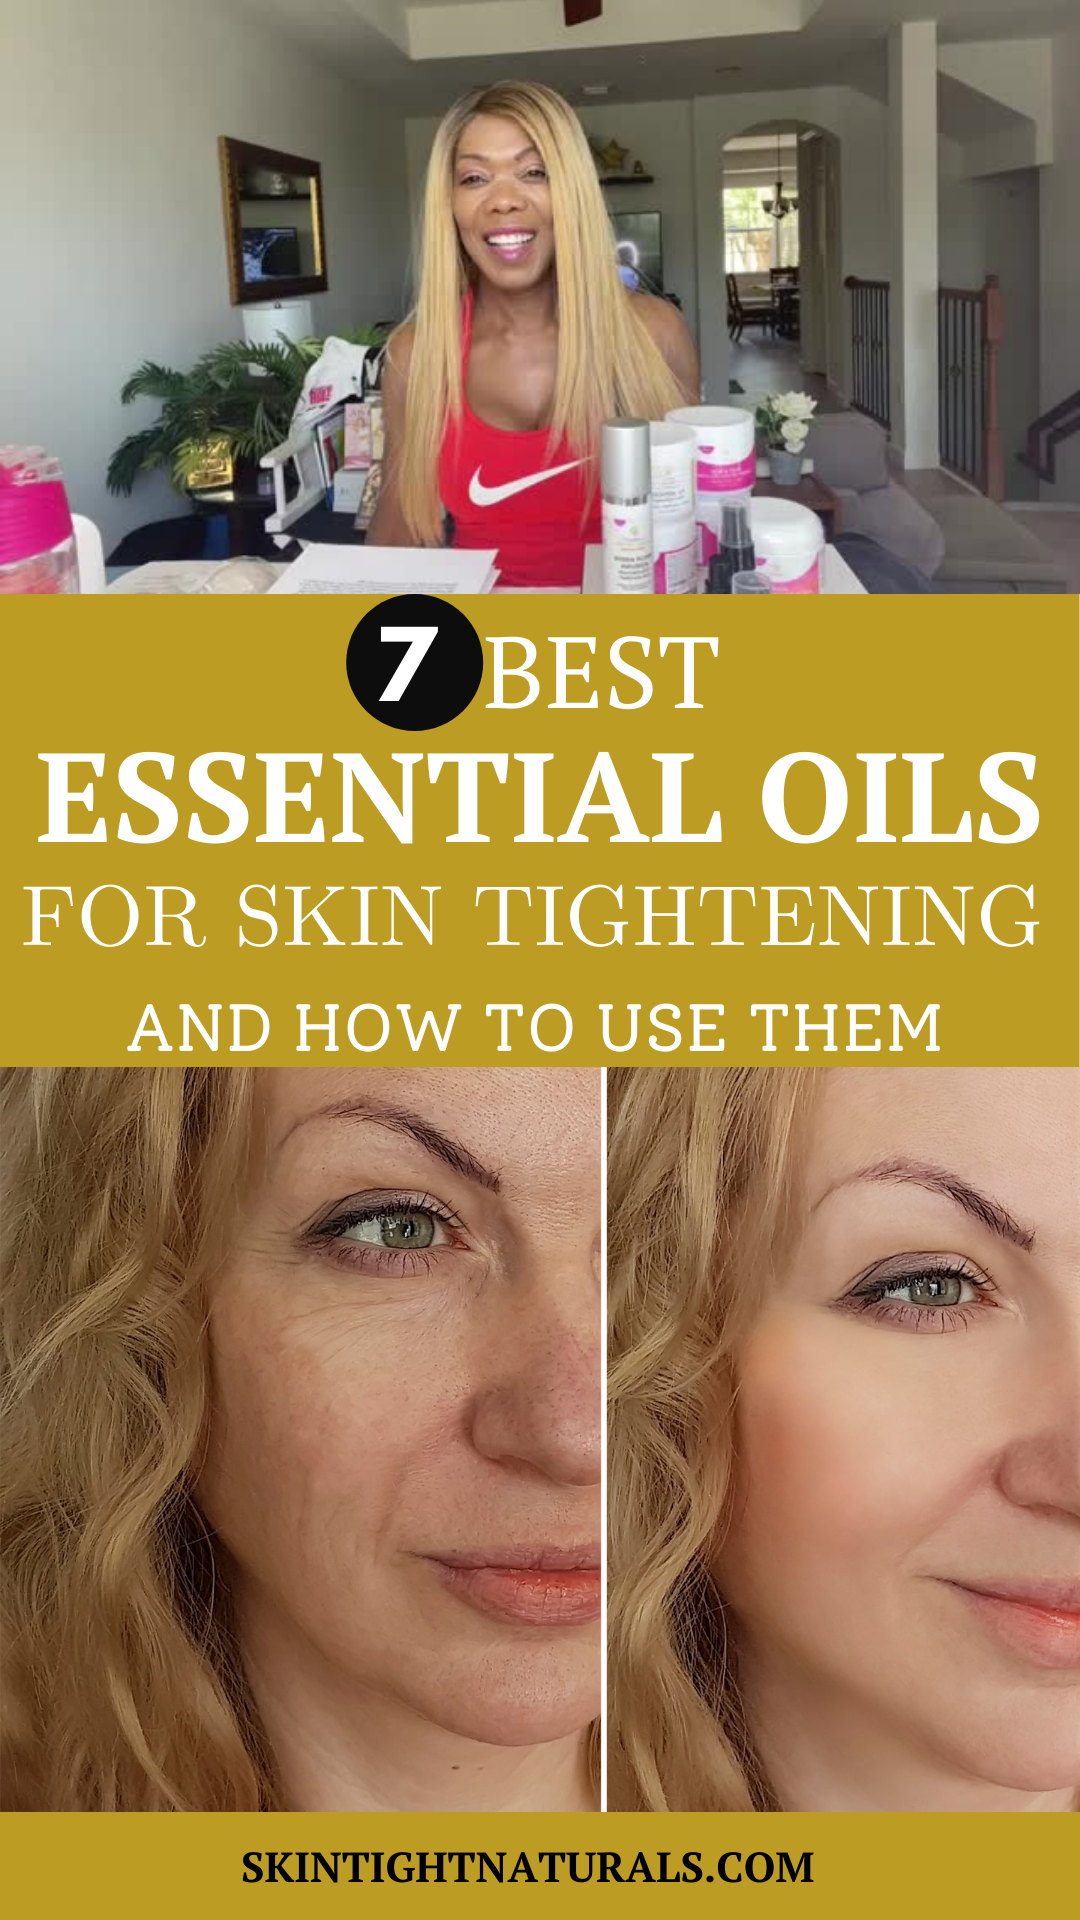 How To Tighten Sagging Skin With Essential Oils